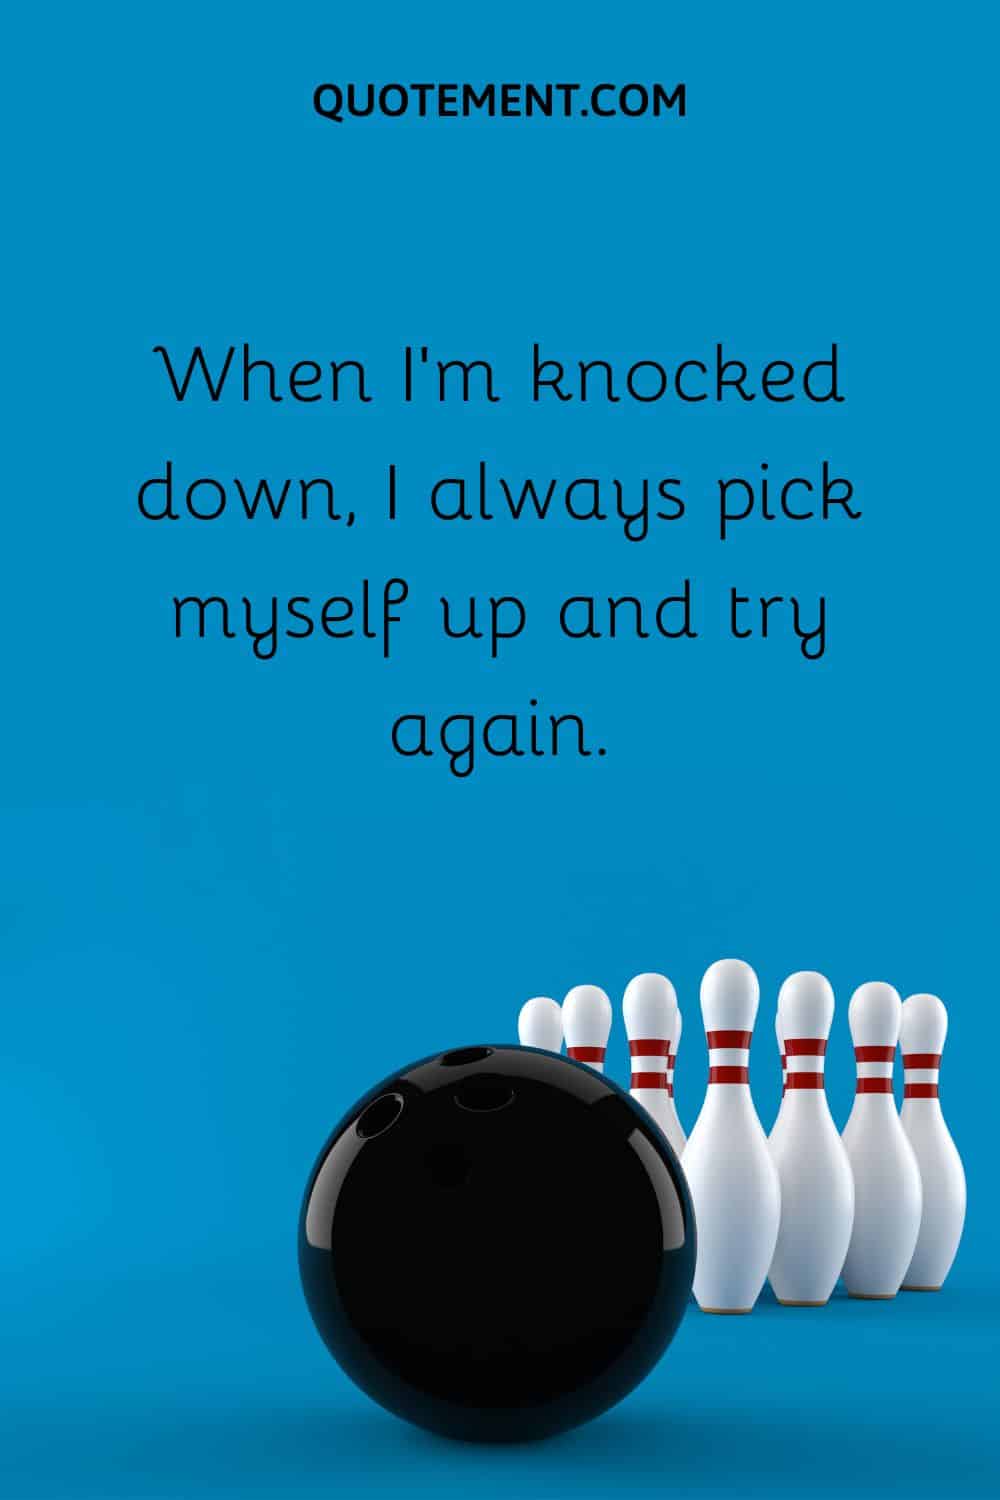 When I’m knocked down, I always pick myself up and try again